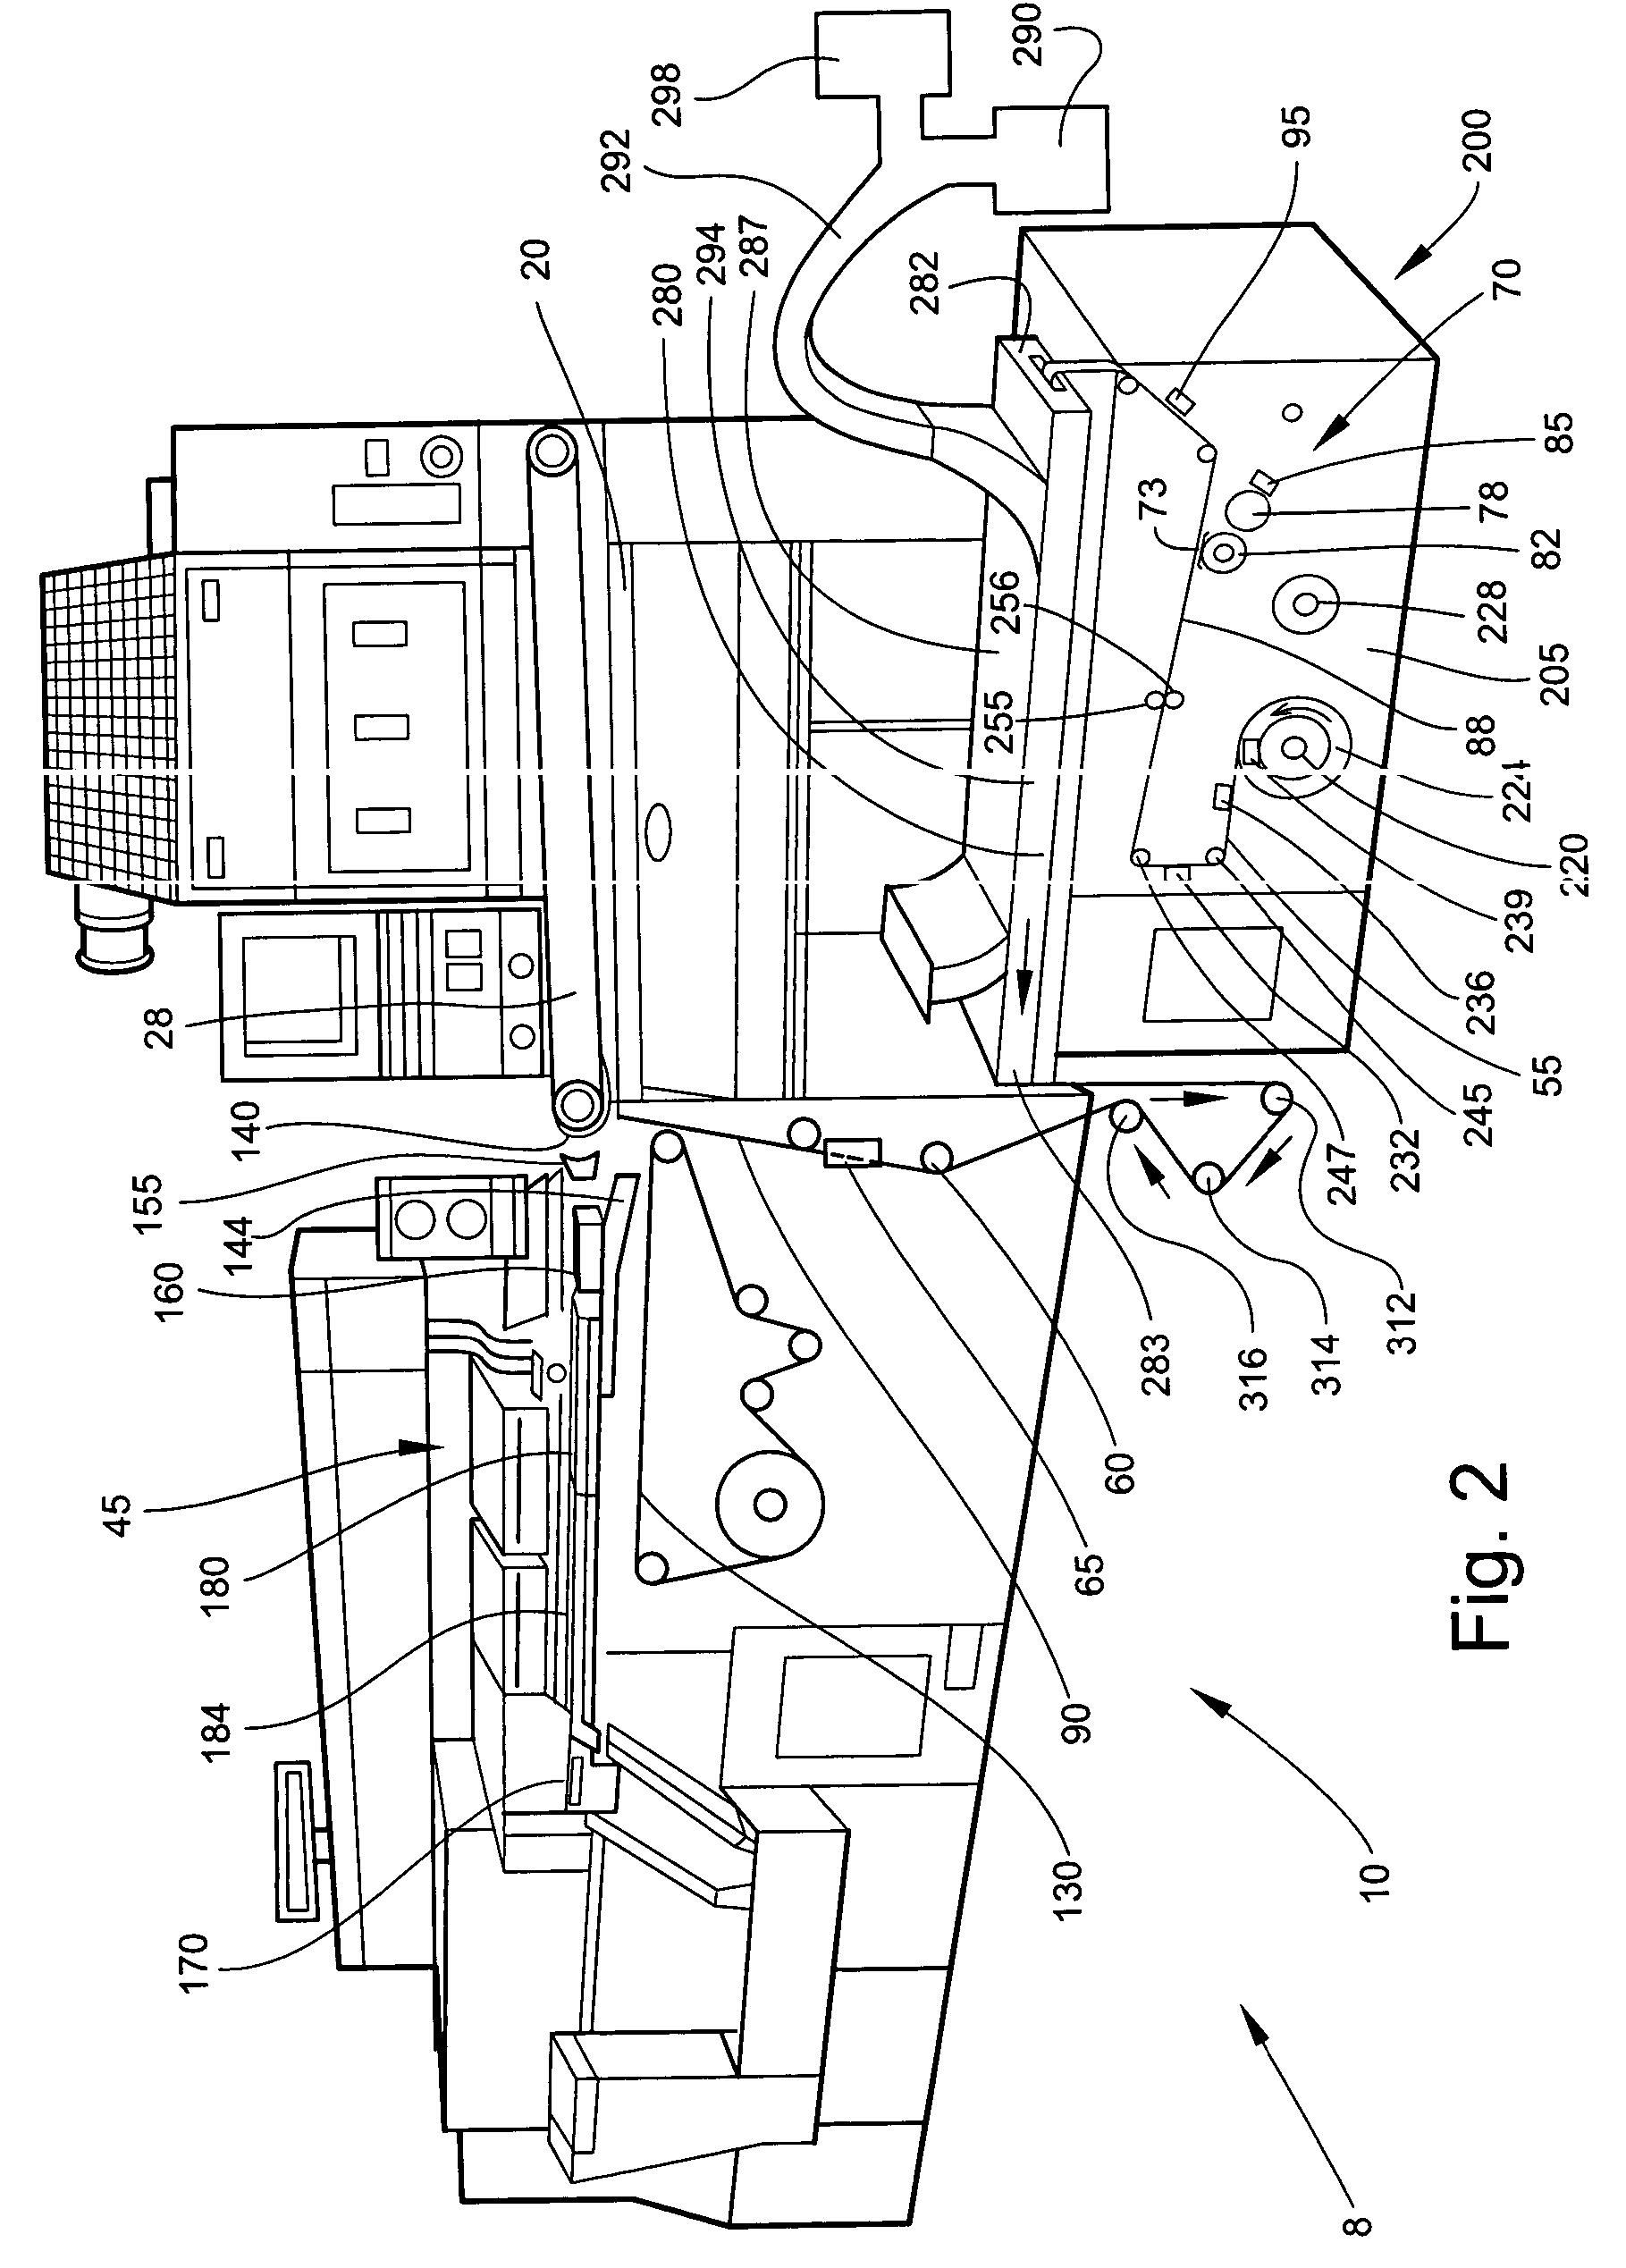 Materials, equipment and methods for manufacturing cigarettes